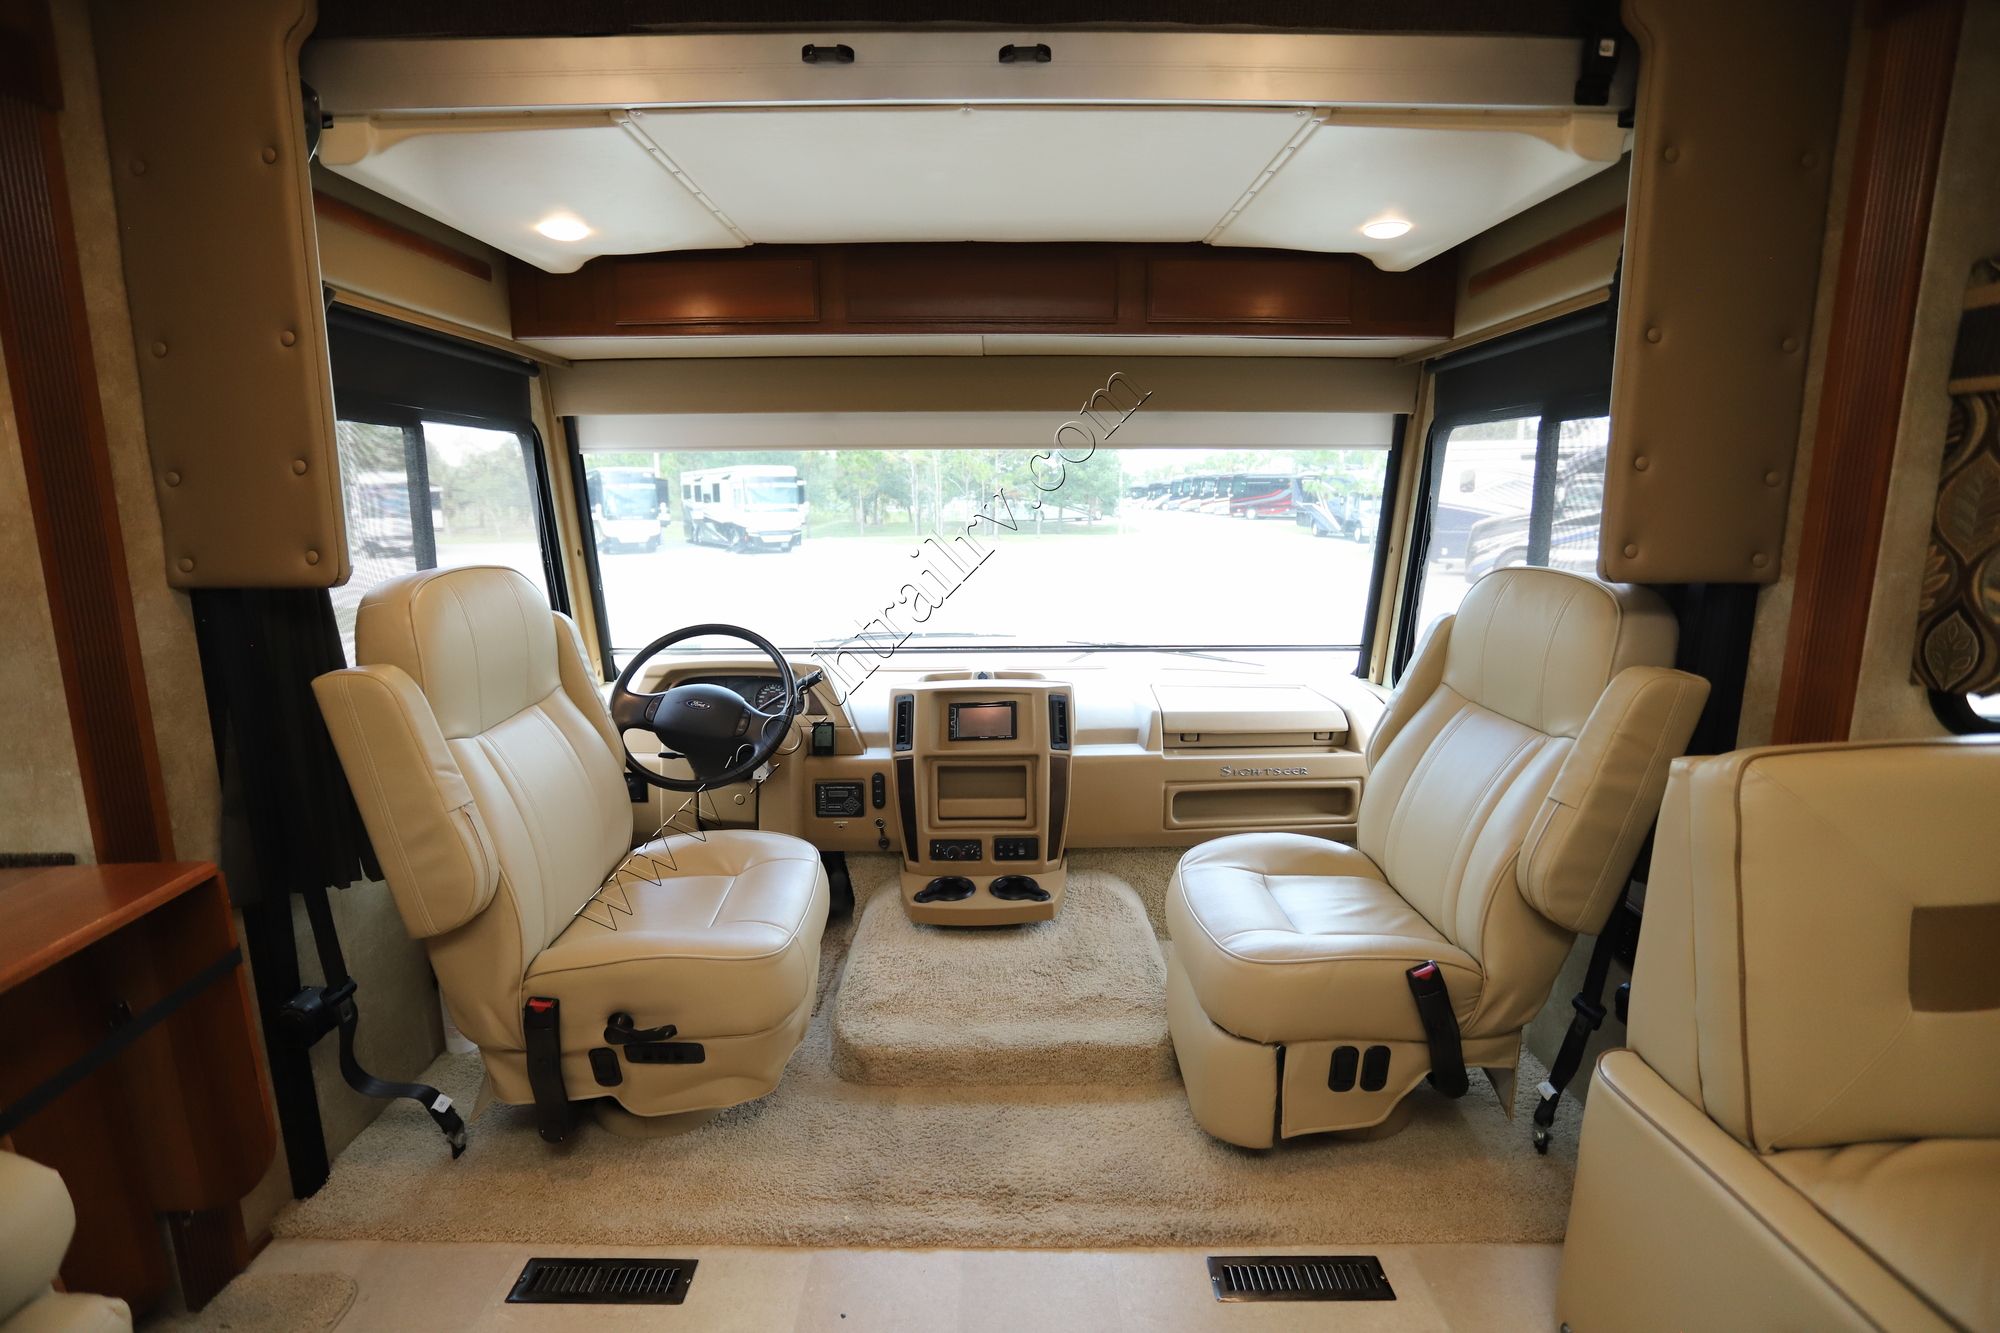 Used 2016 Winnebago Sightseer 35G Class A  For Sale